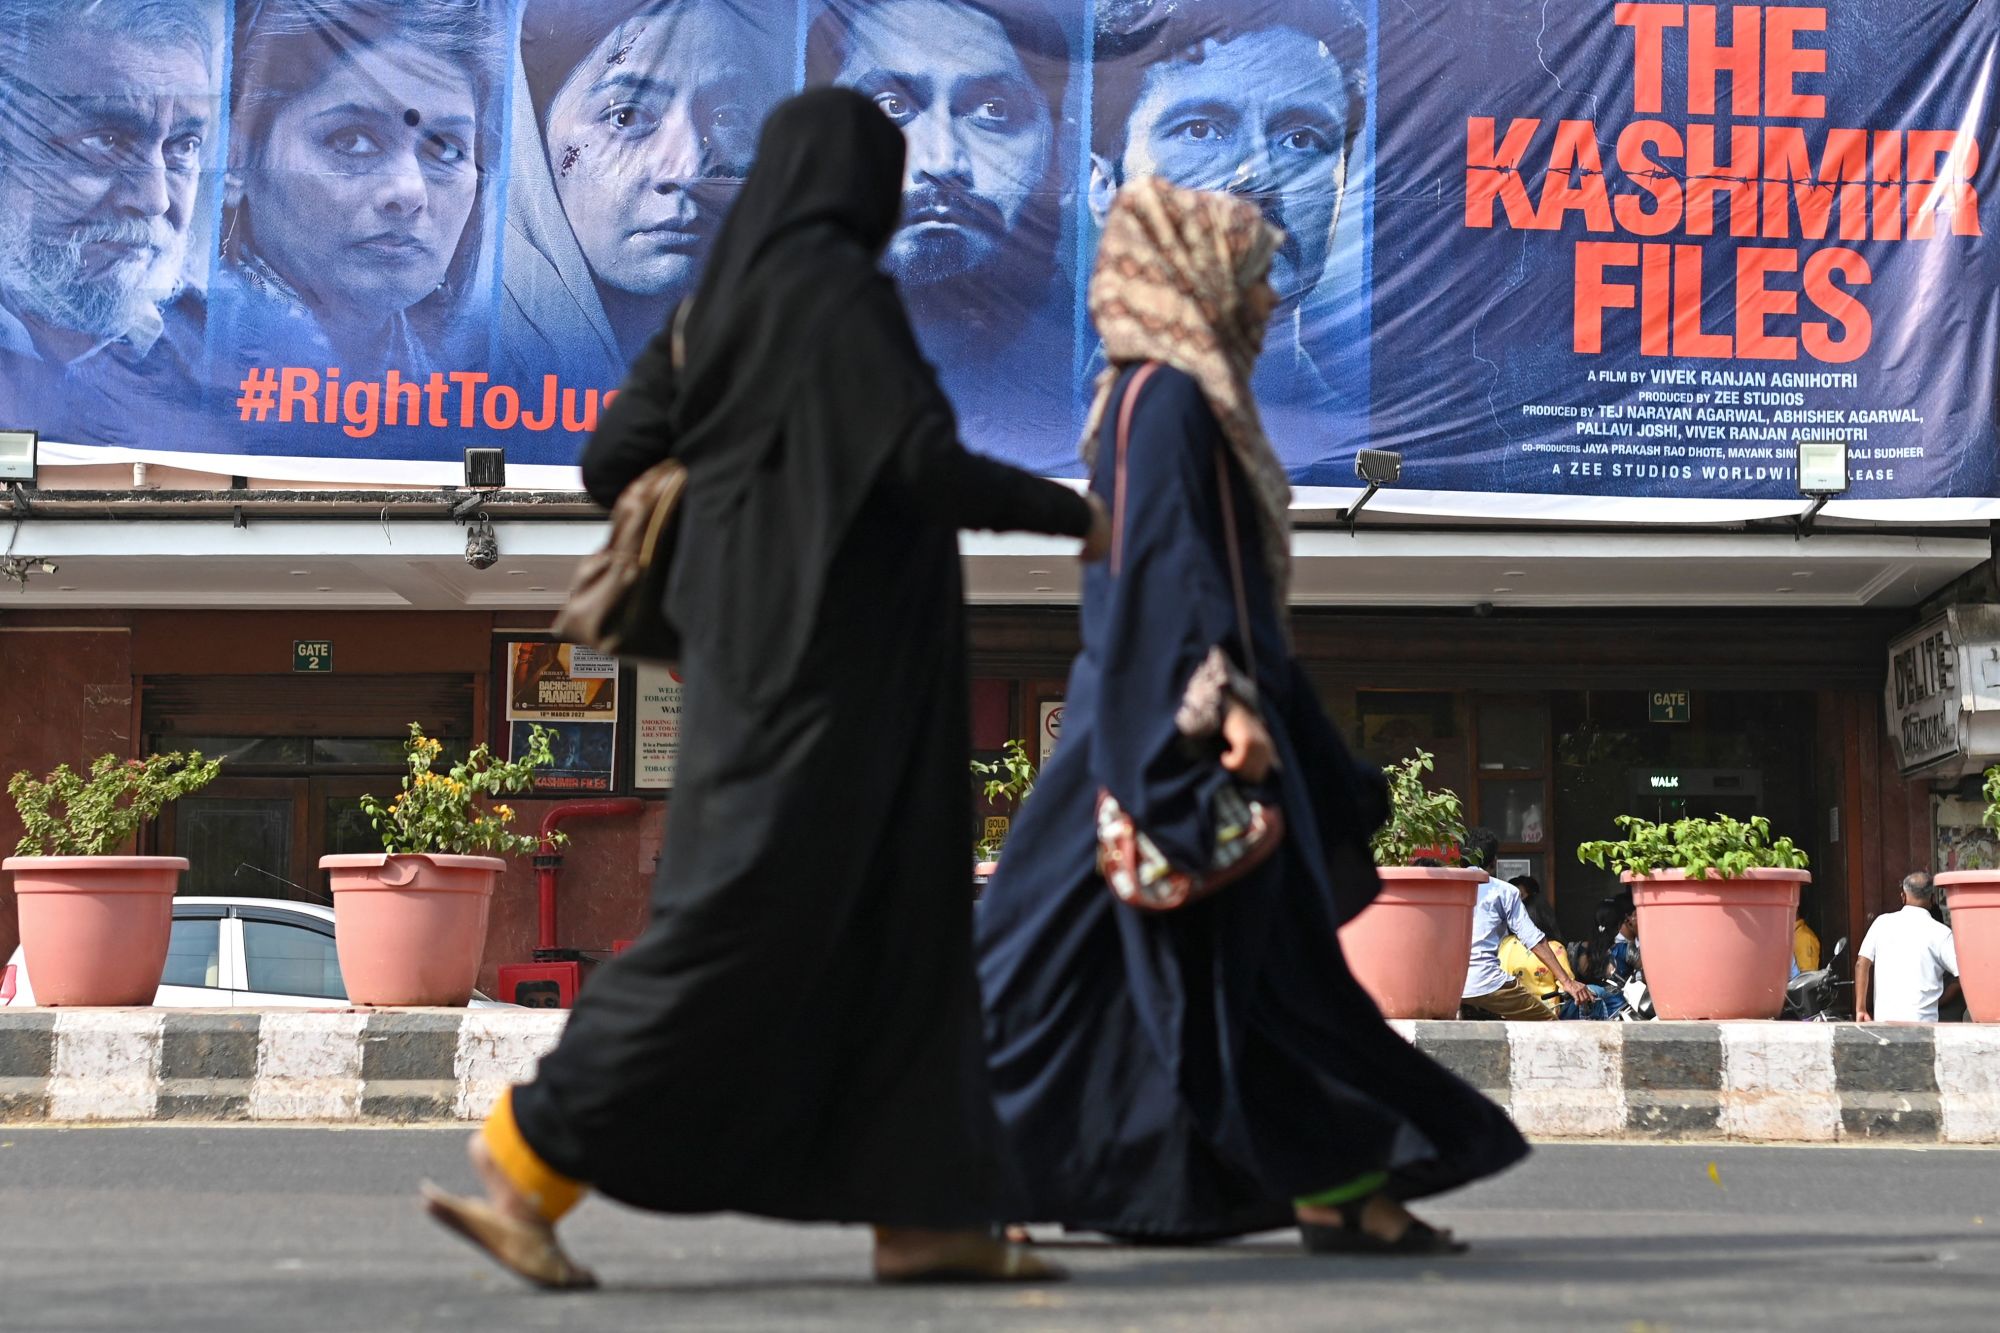 Kashmiri Pandit Girls In Sex - India's latest box office smash 'The Kashmir Files' exposes deepening  religious divides | CNN